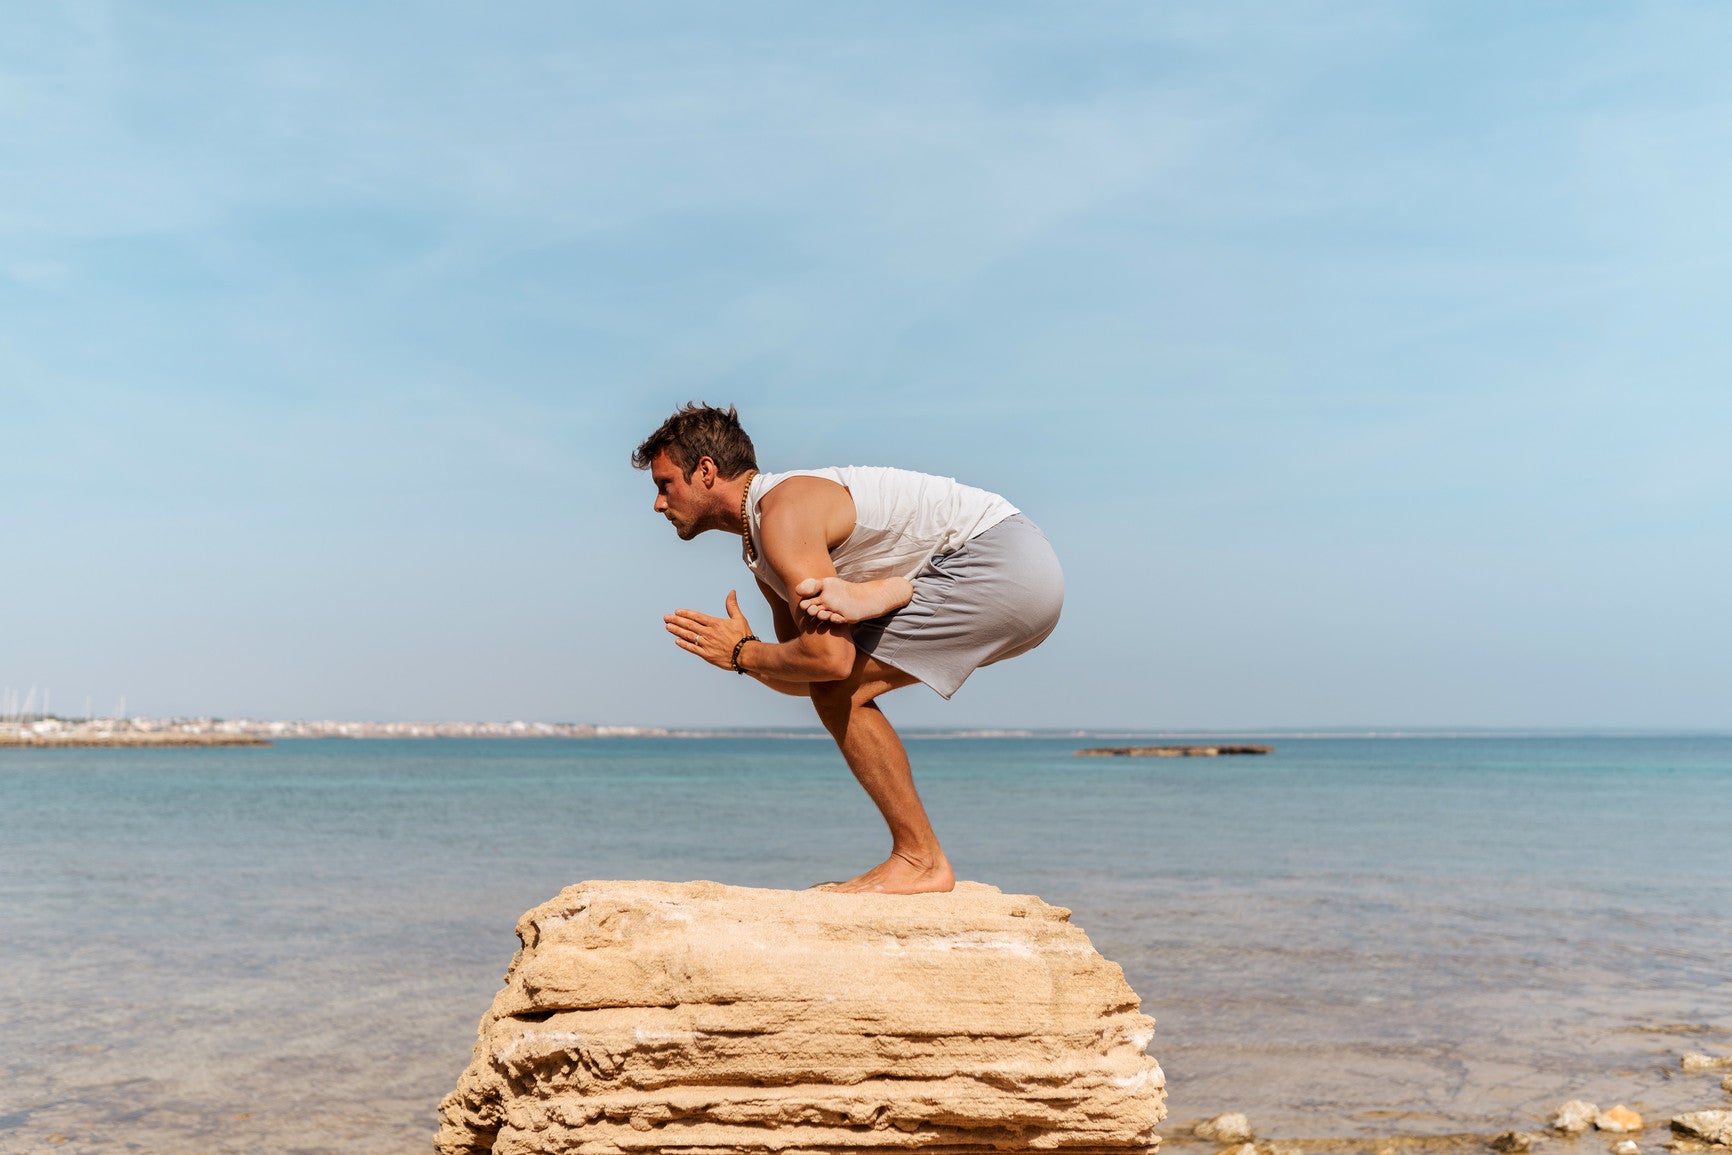 Man practicing a one leg balance pose on top of a rock by the ocean. Yoga stimulates the vagal nerve and may reduce PTSD symptoms.